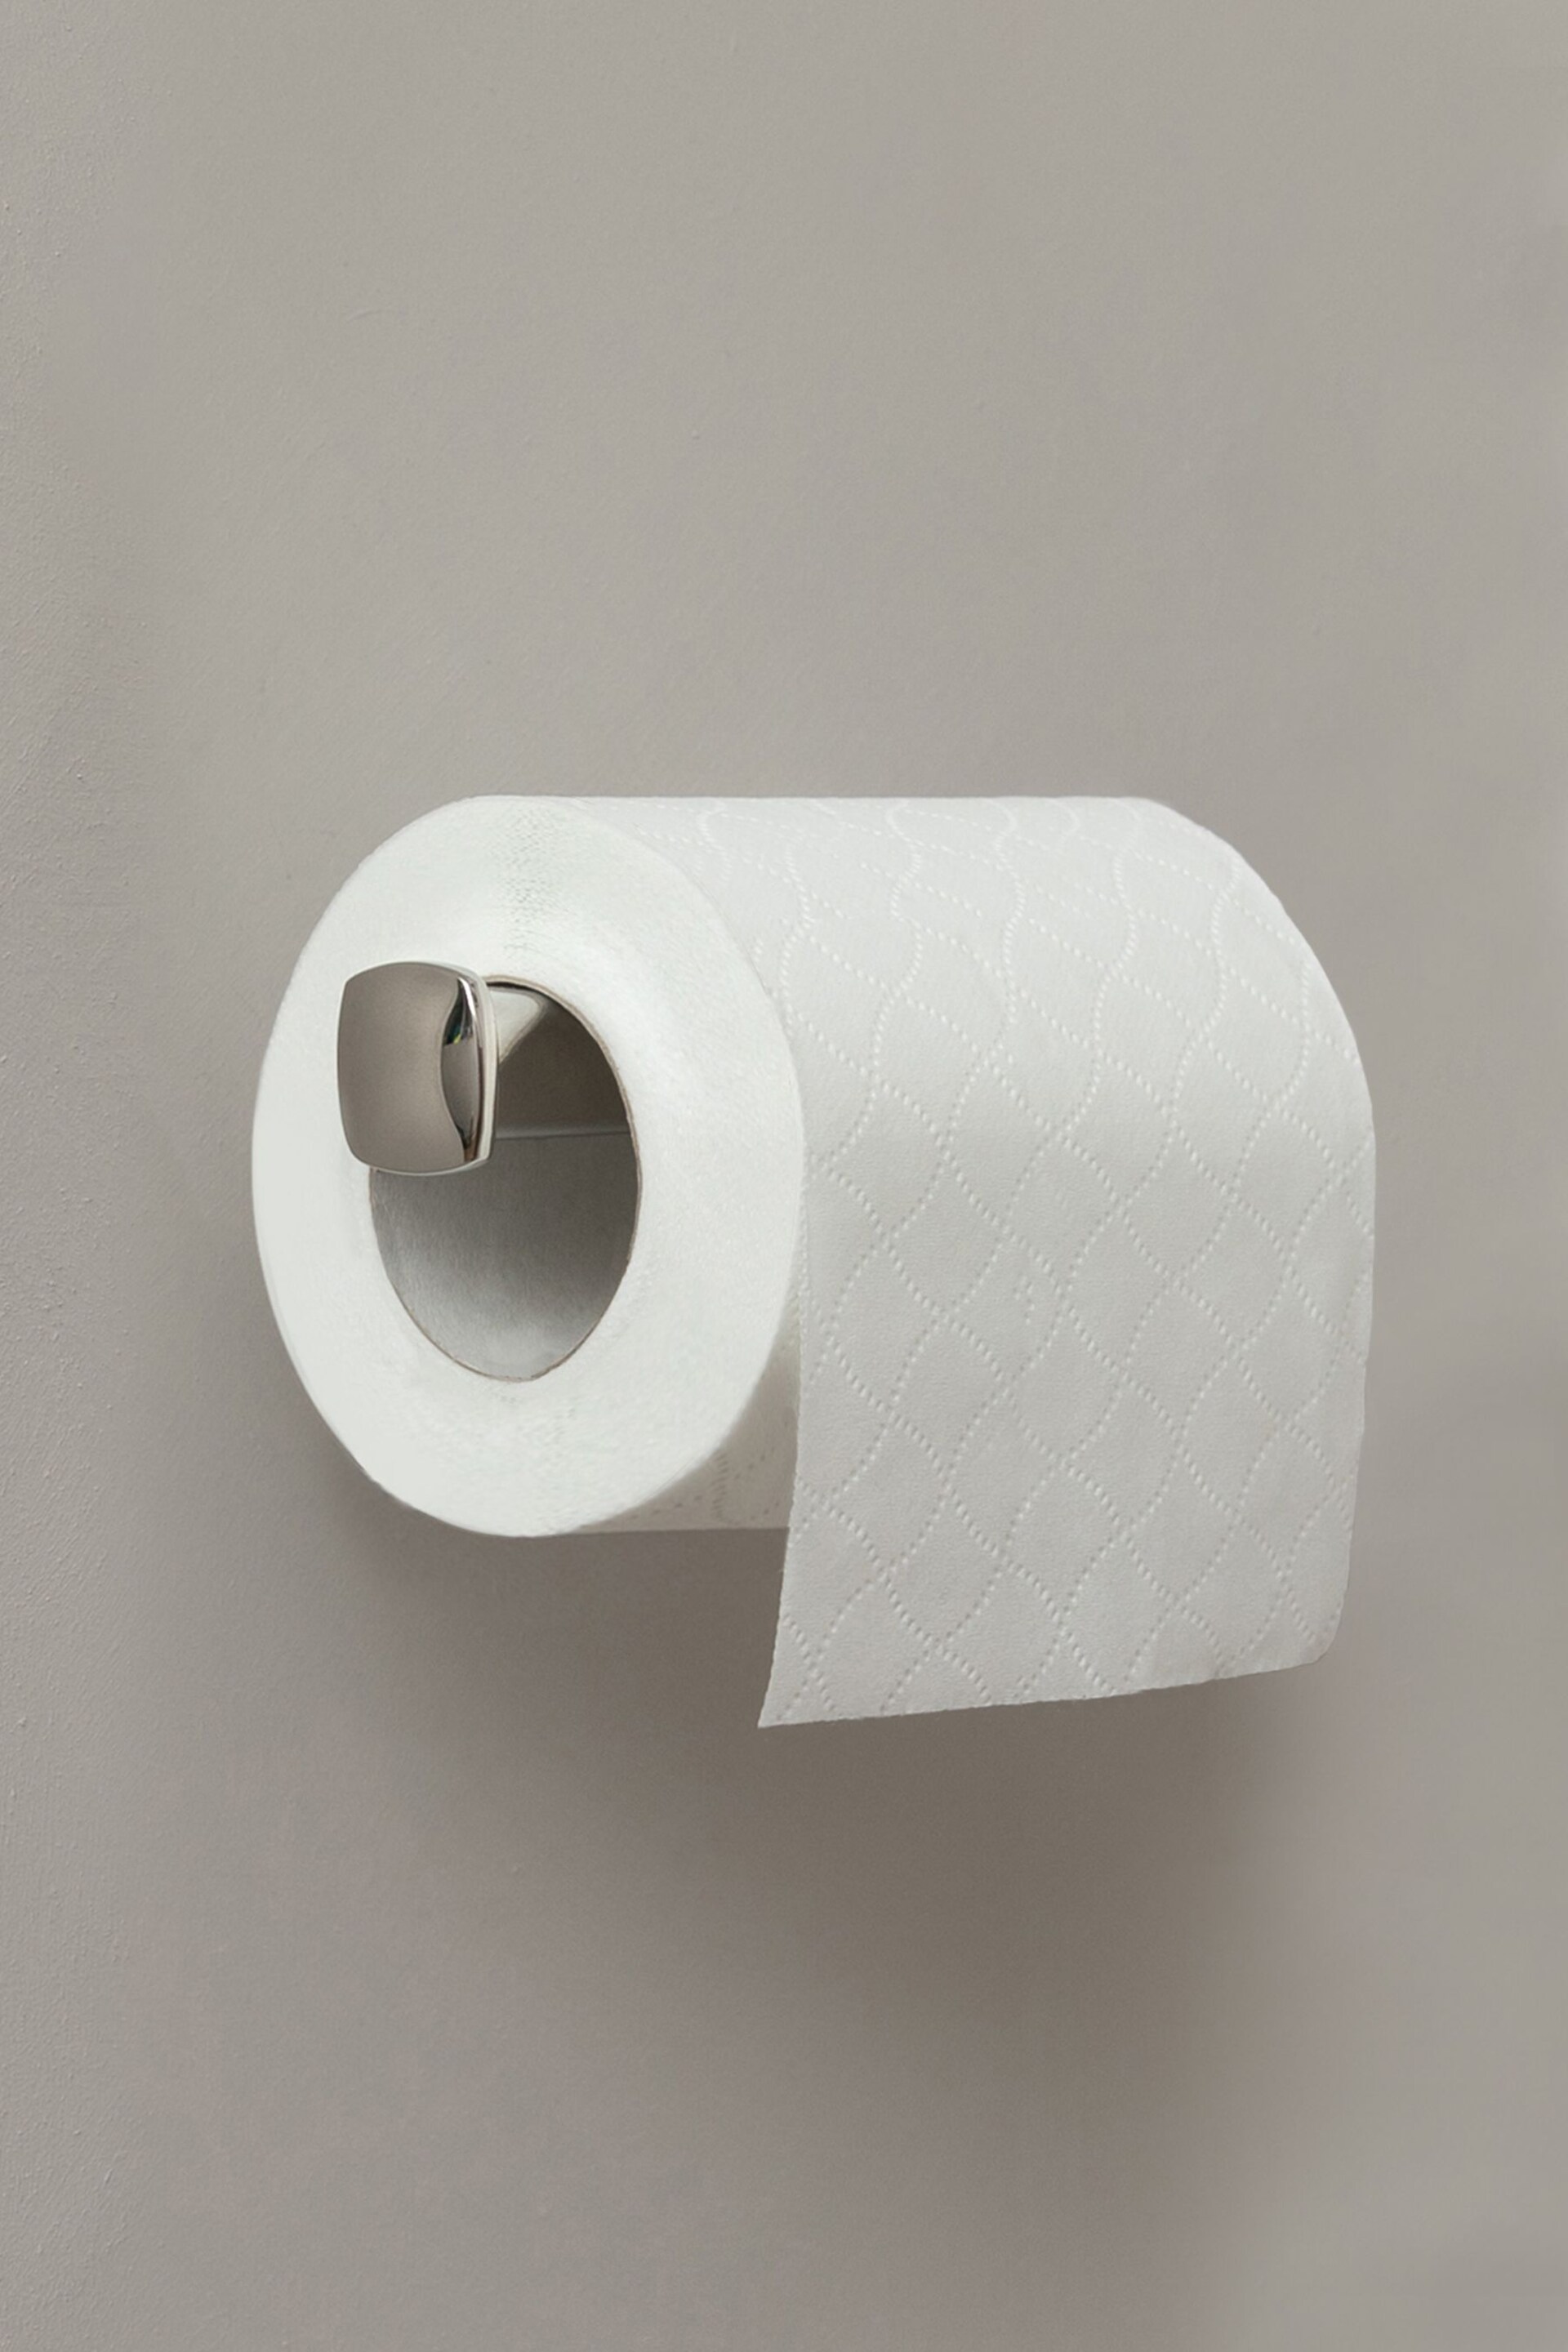 Robert Welch Silver Burford Toilet Roll Holder Fixed - Image 1 of 4